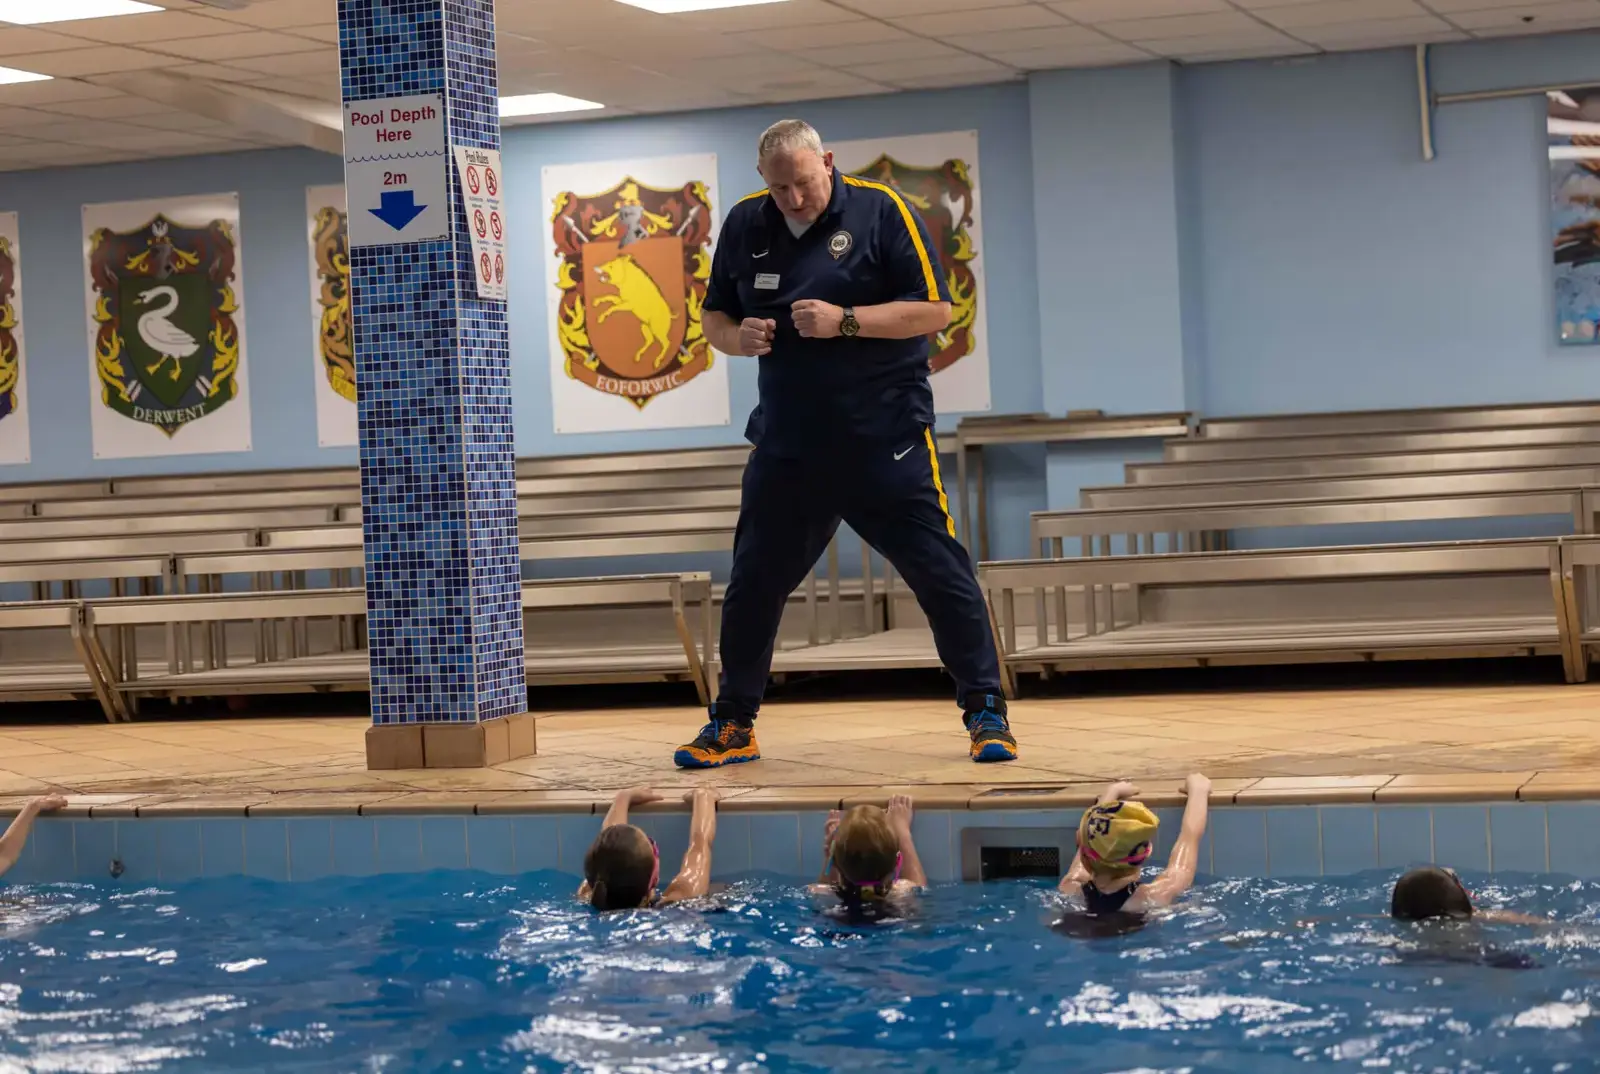 Chapter House pupils in swimming lesson taught by dedicated swimming coach.